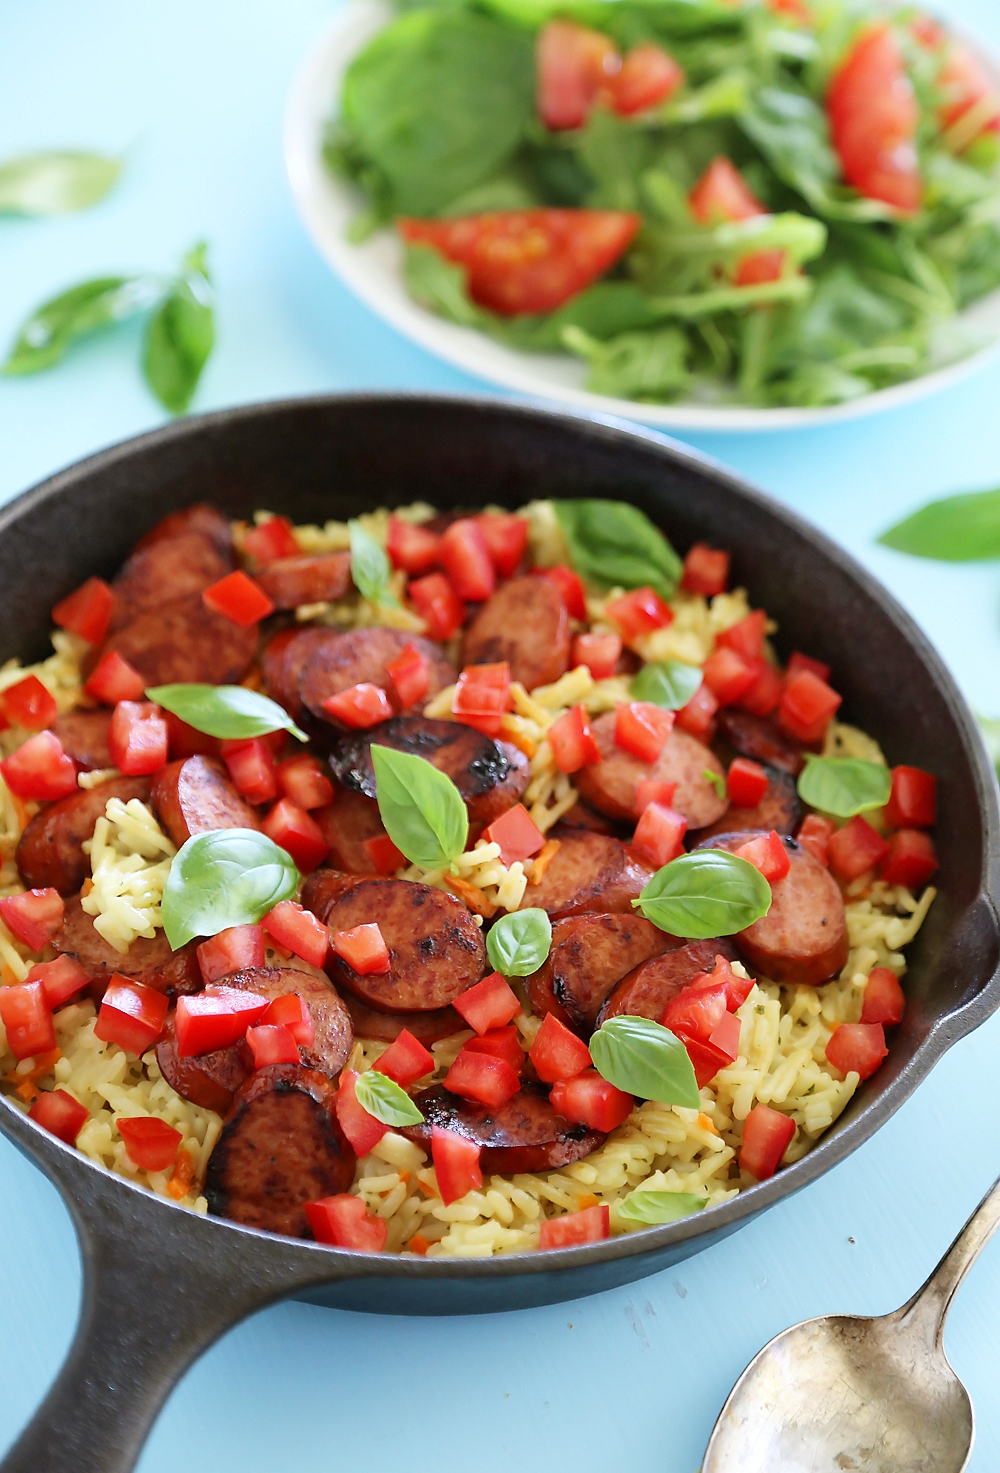 Bruschetta Chicken Sausage and Creamy Rice Skillet – Just 5 ingredients + 20 minutes. Try this fresh, healthy and hearty weeknight meal tonight! thecomfortofcooking.com